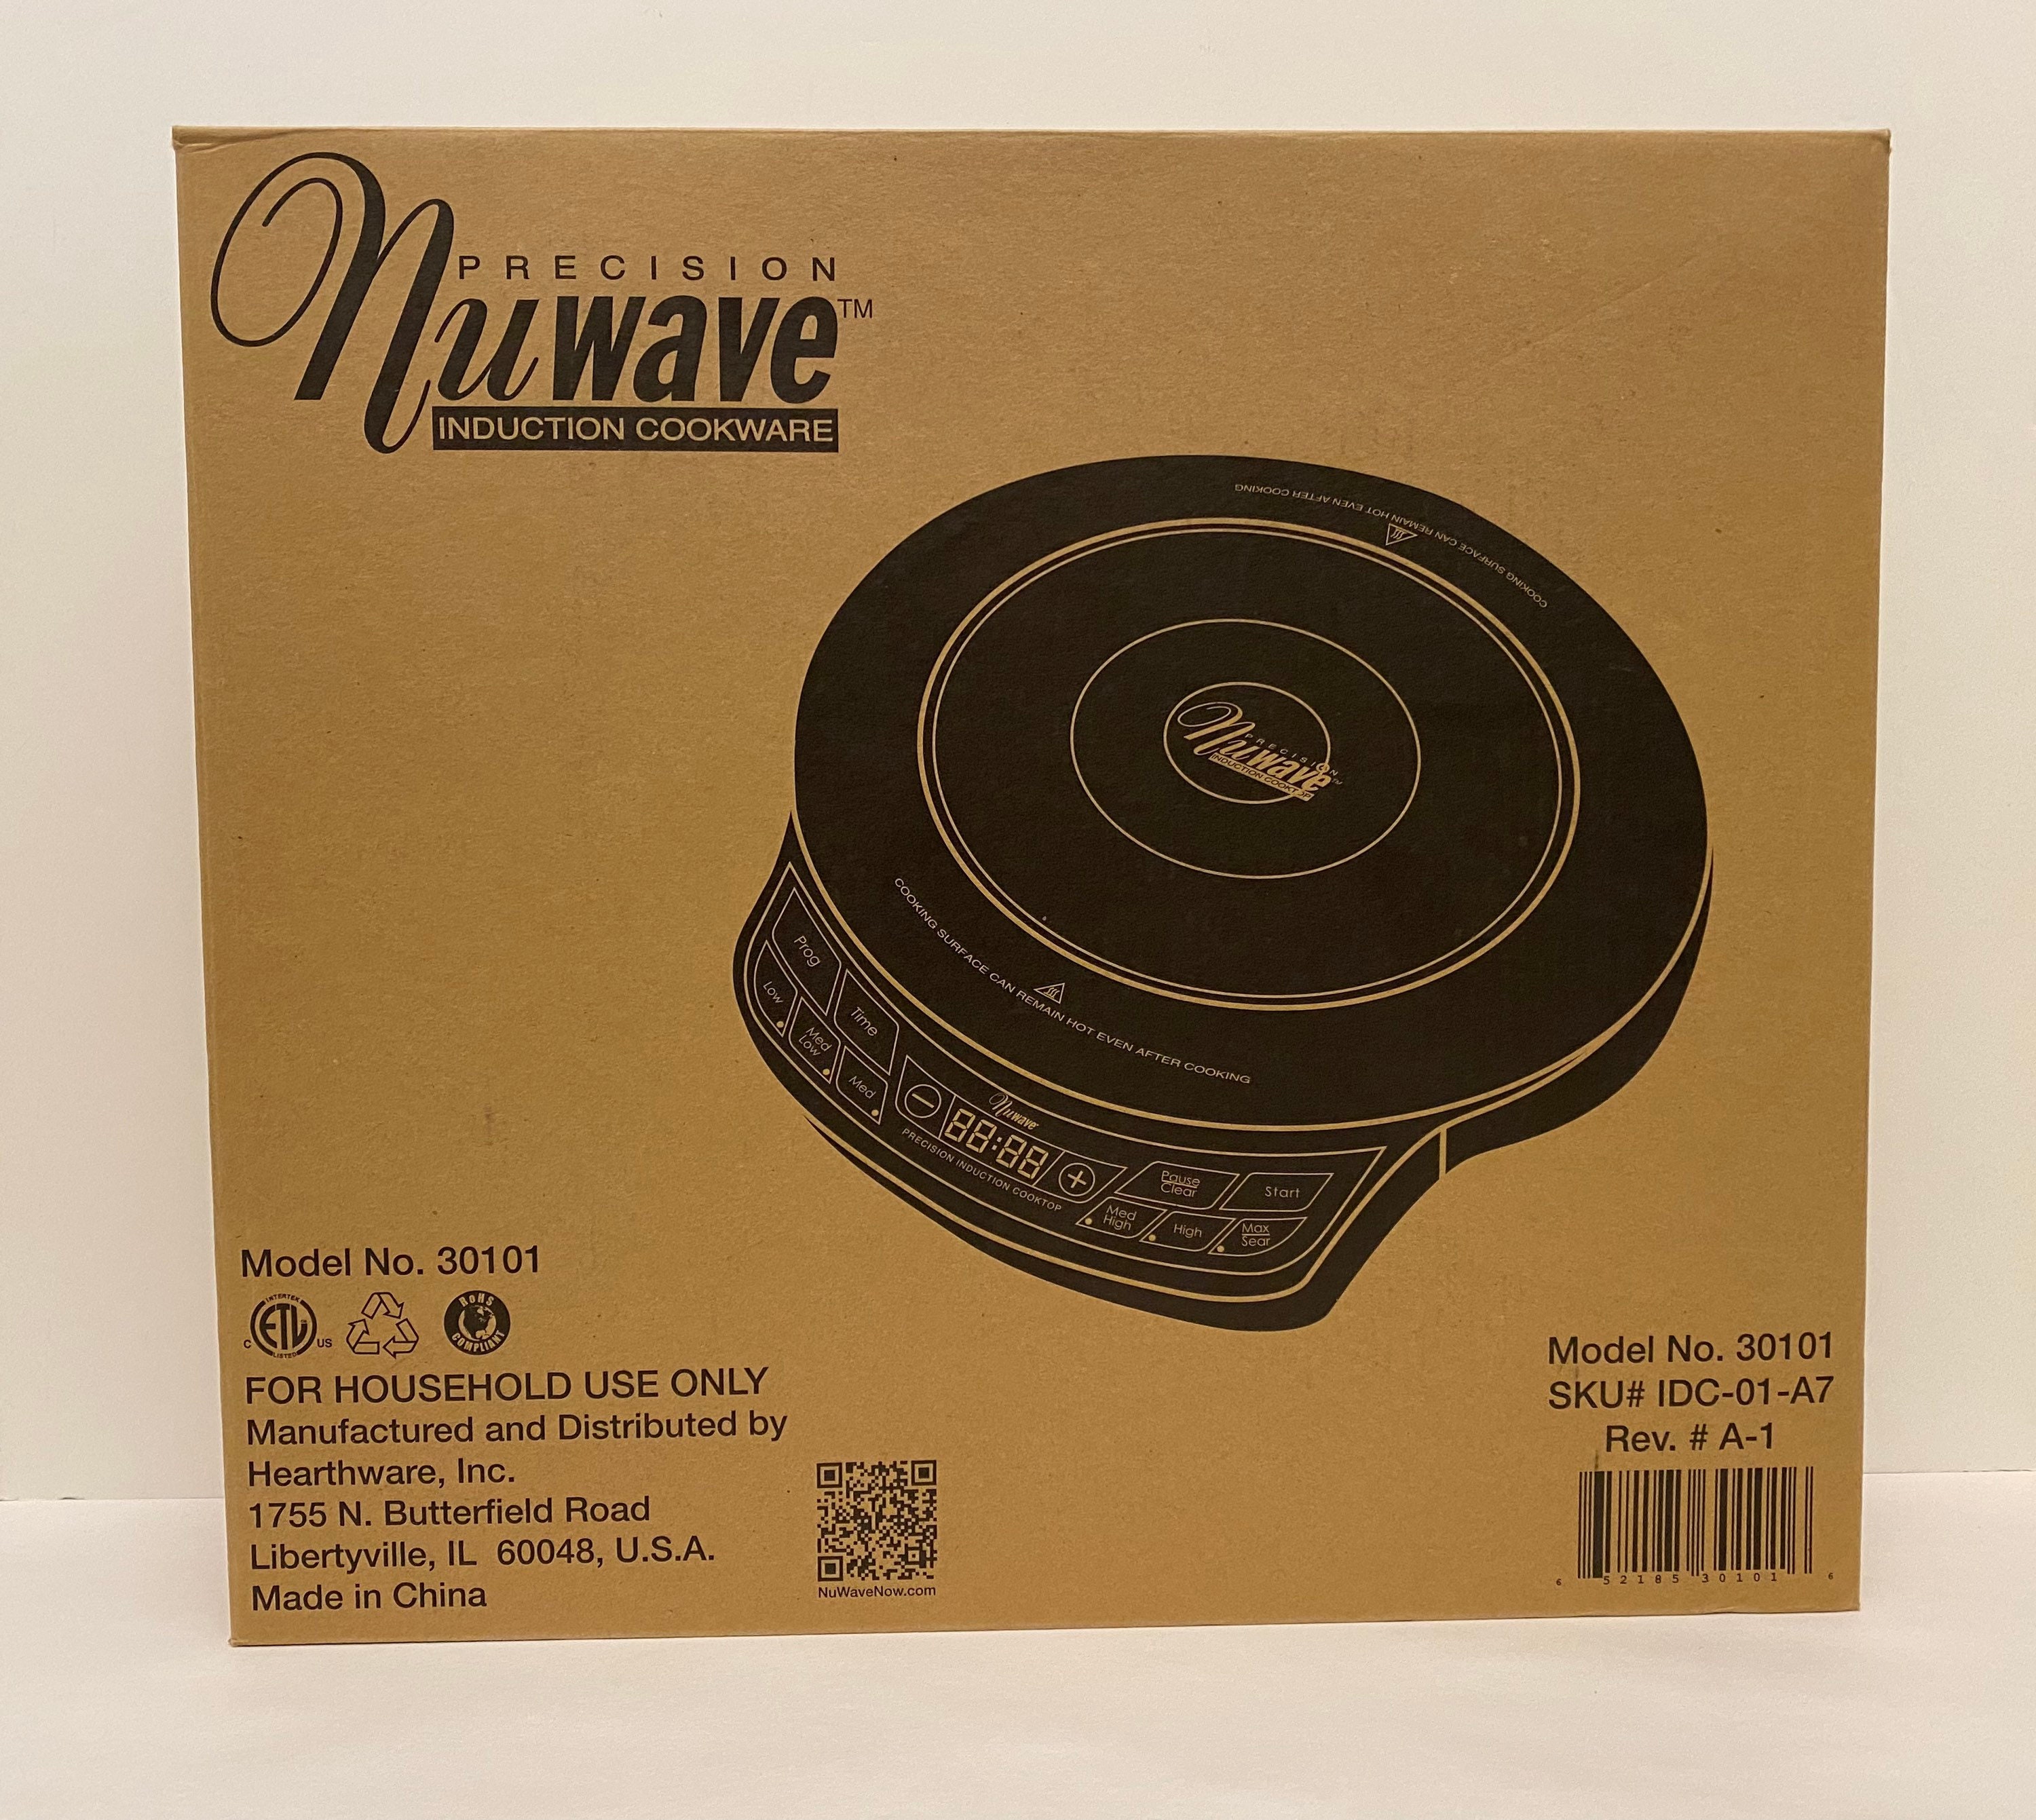 Nuwave Precision Induction Cookware Cooktop Model 30101 New 